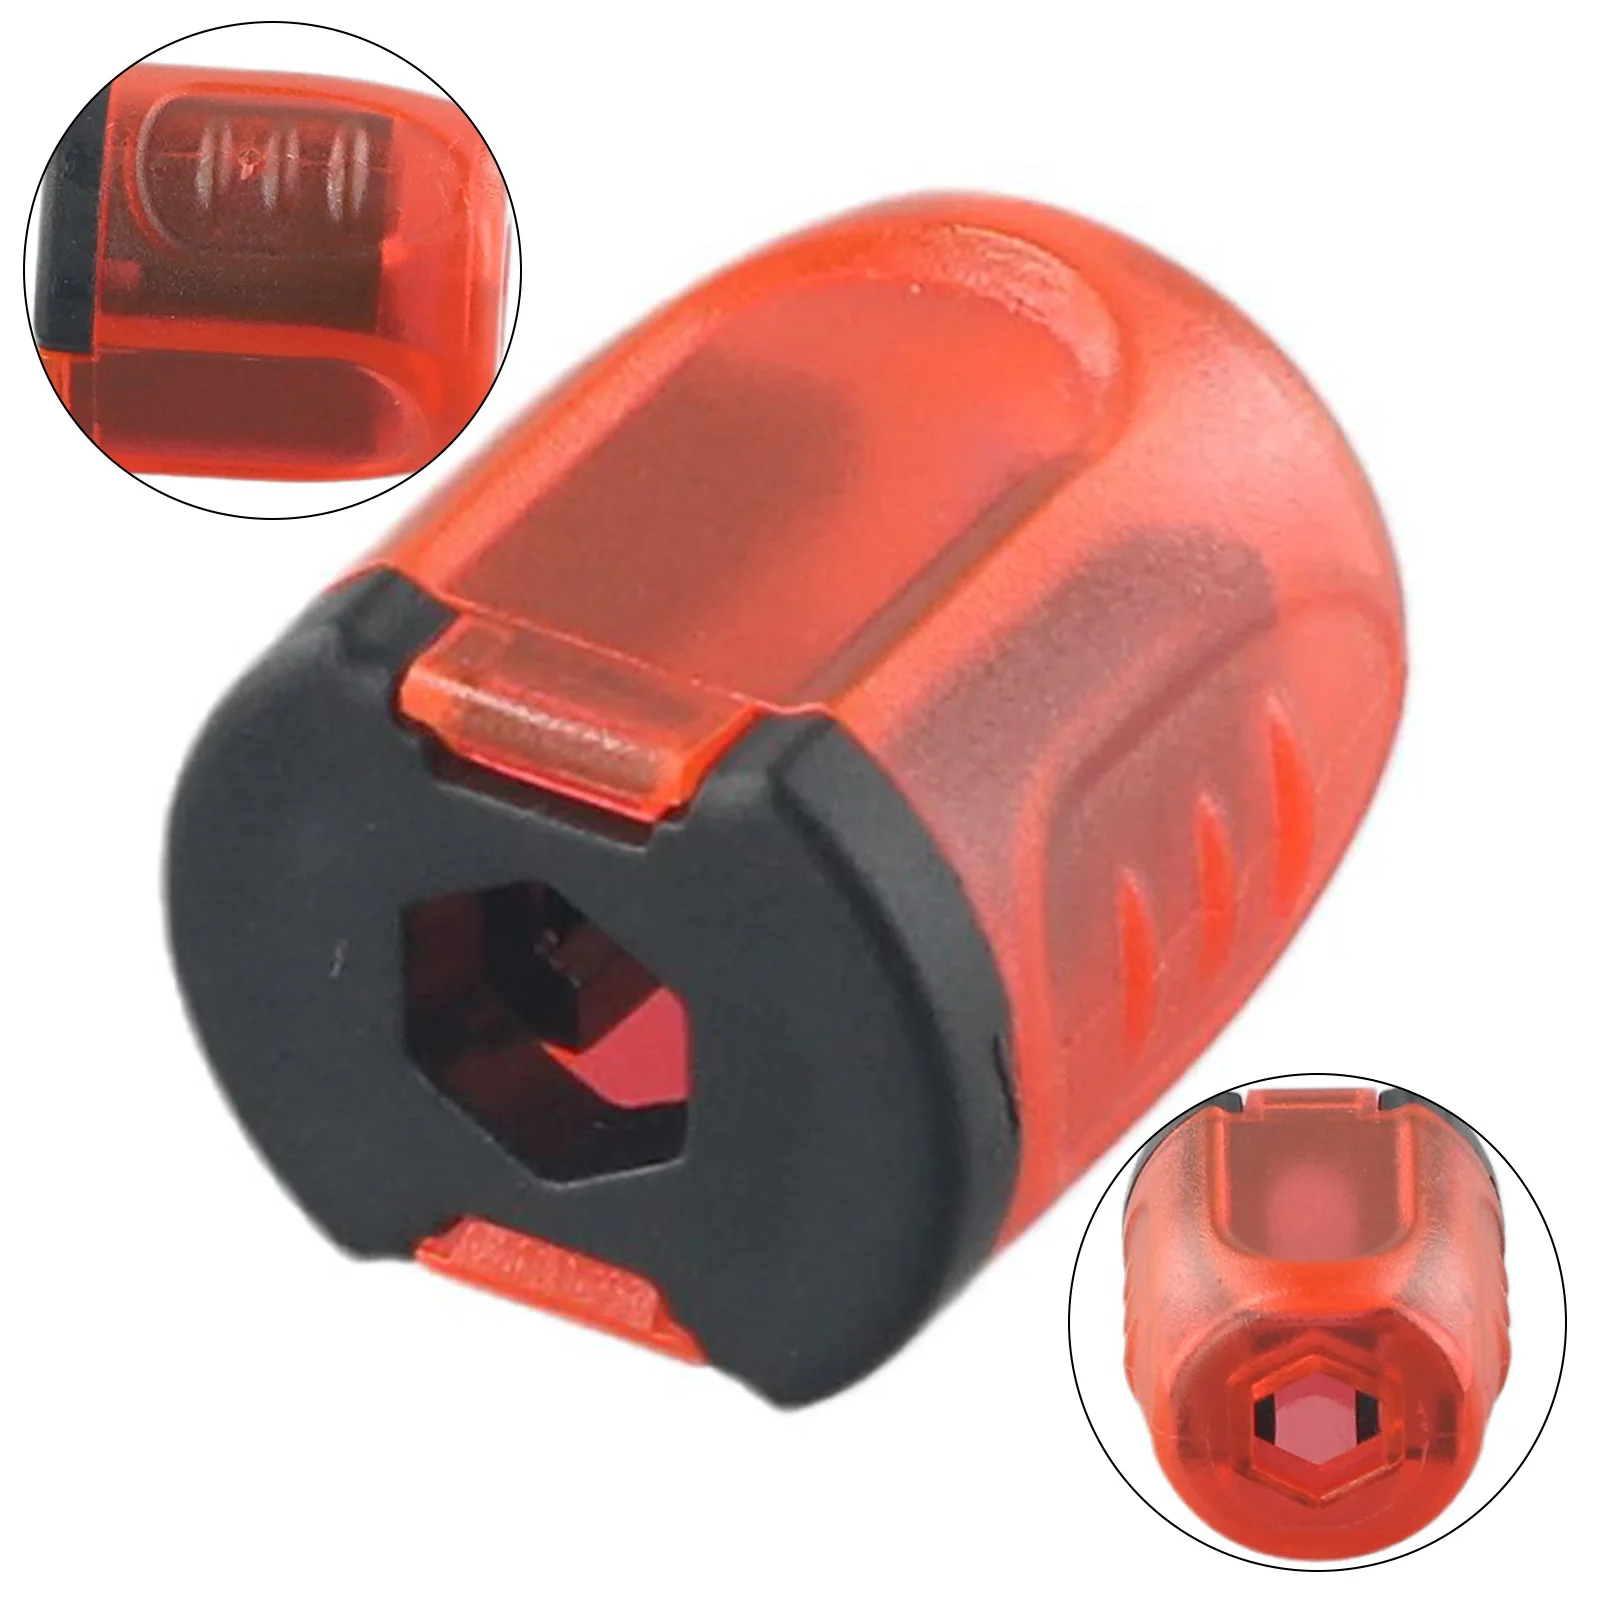 

For Drill Bits Magnetizer Degauss Plastic Screwdriver Magnetizer Wear Resistance Durable For 6.35mm Shank Hand Tools